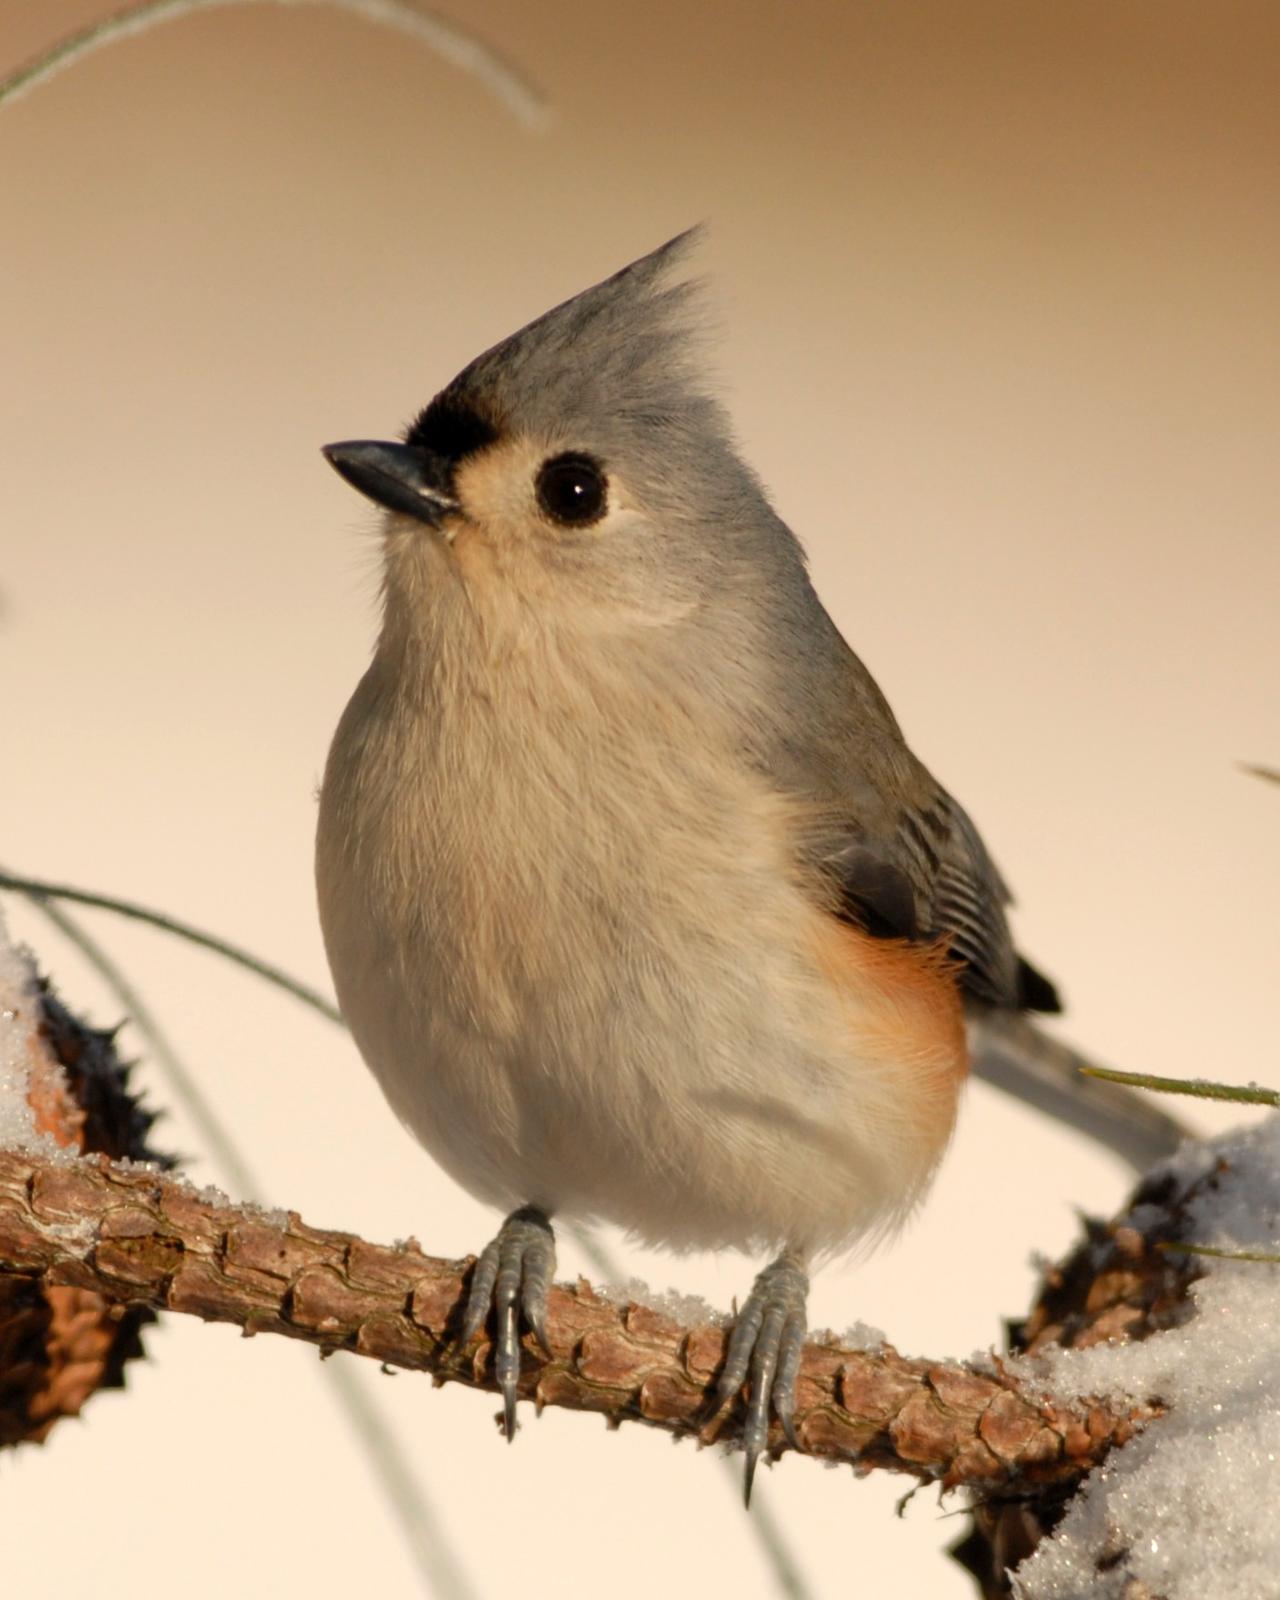 Tufted Titmouse Photo by David Hollie